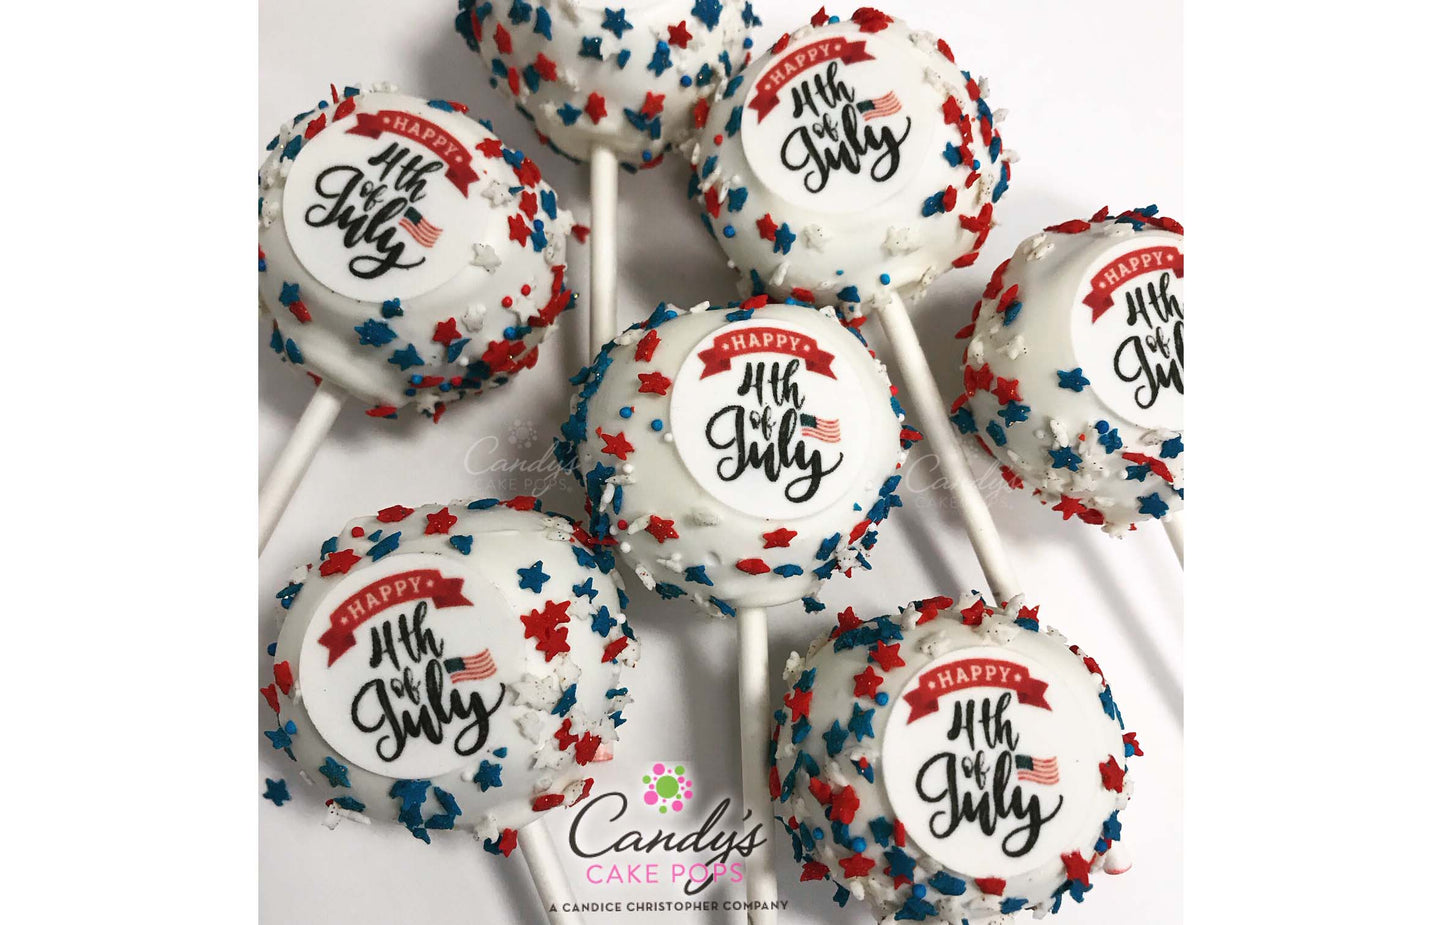 Happy Fourth of July Decal Cake Pops - Candy's Cake Pops